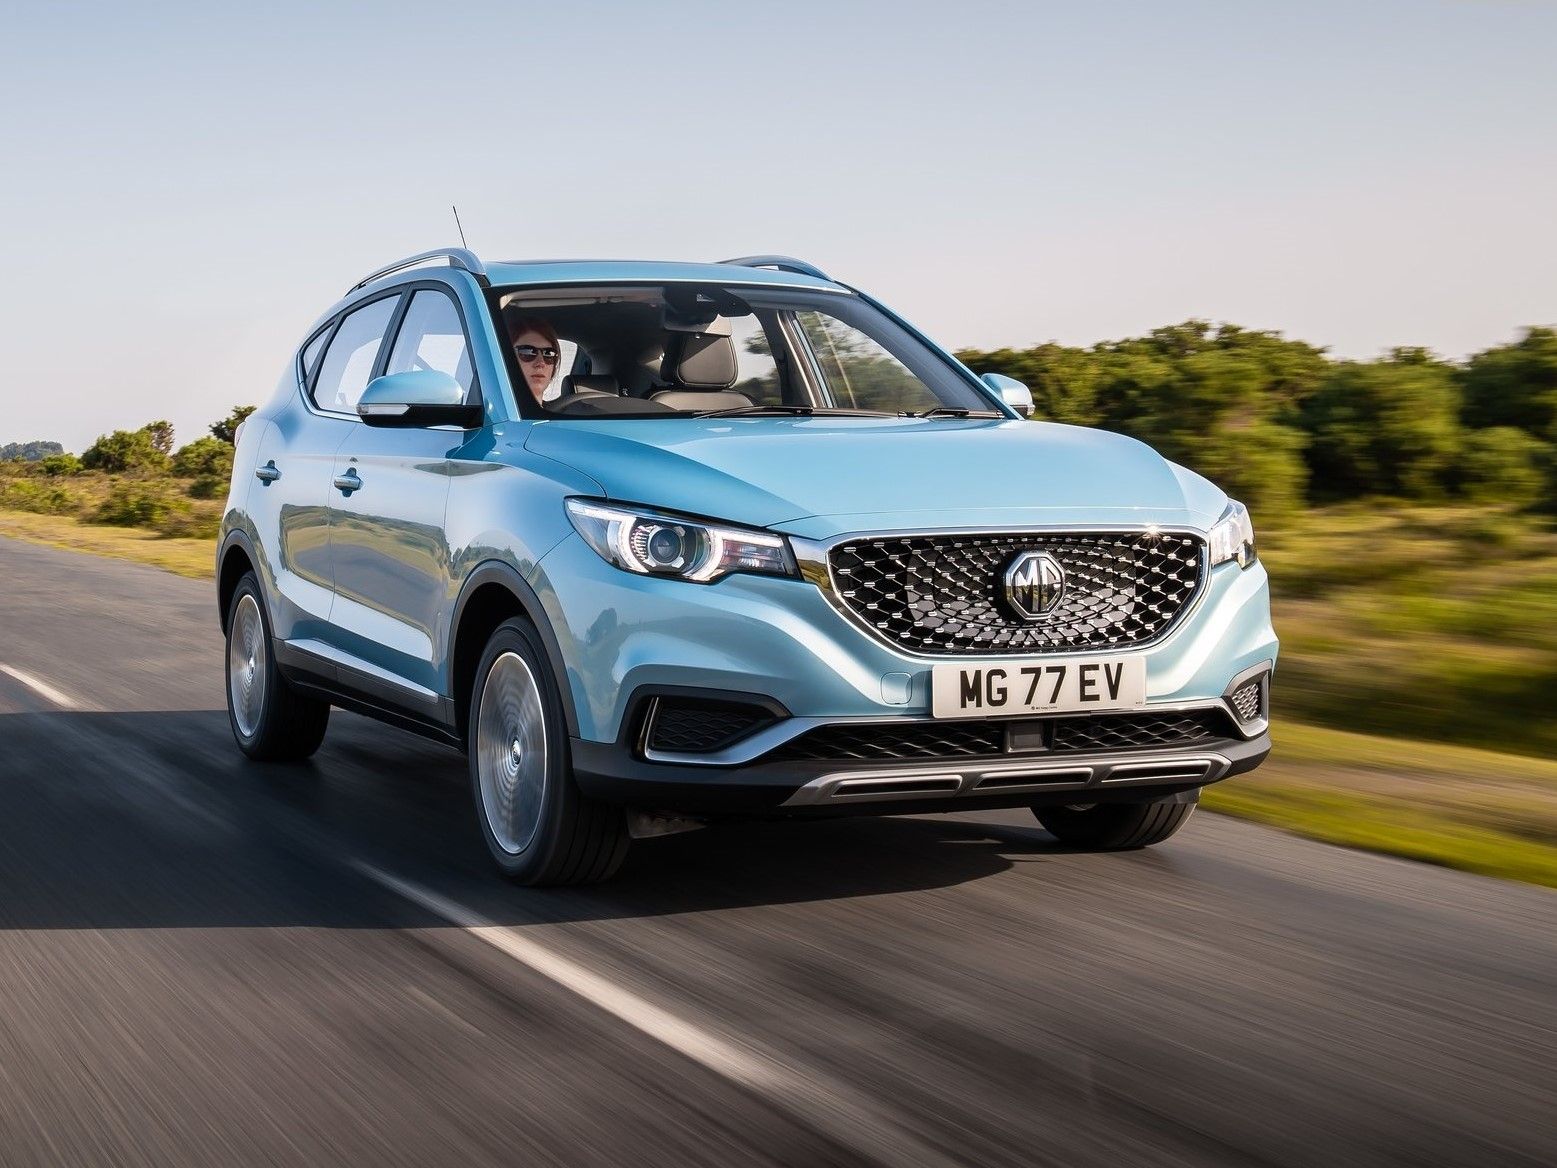 MG ZS EV Showcased At The NuGen Mobility Summit Ahead Of Its Unveil